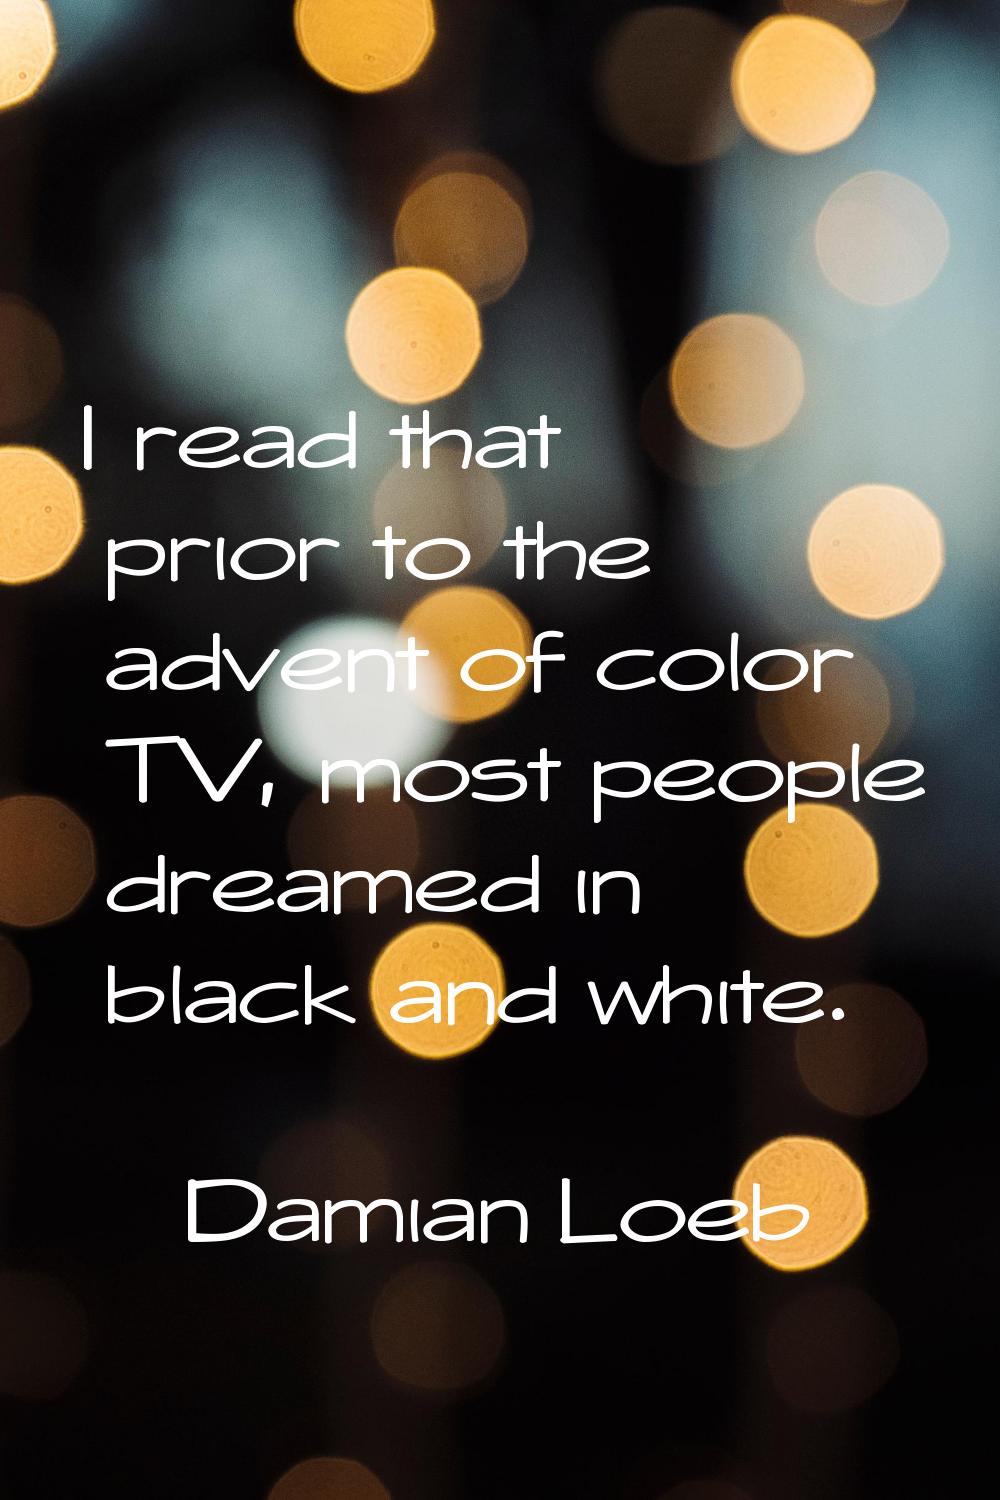 I read that prior to the advent of color TV, most people dreamed in black and white.